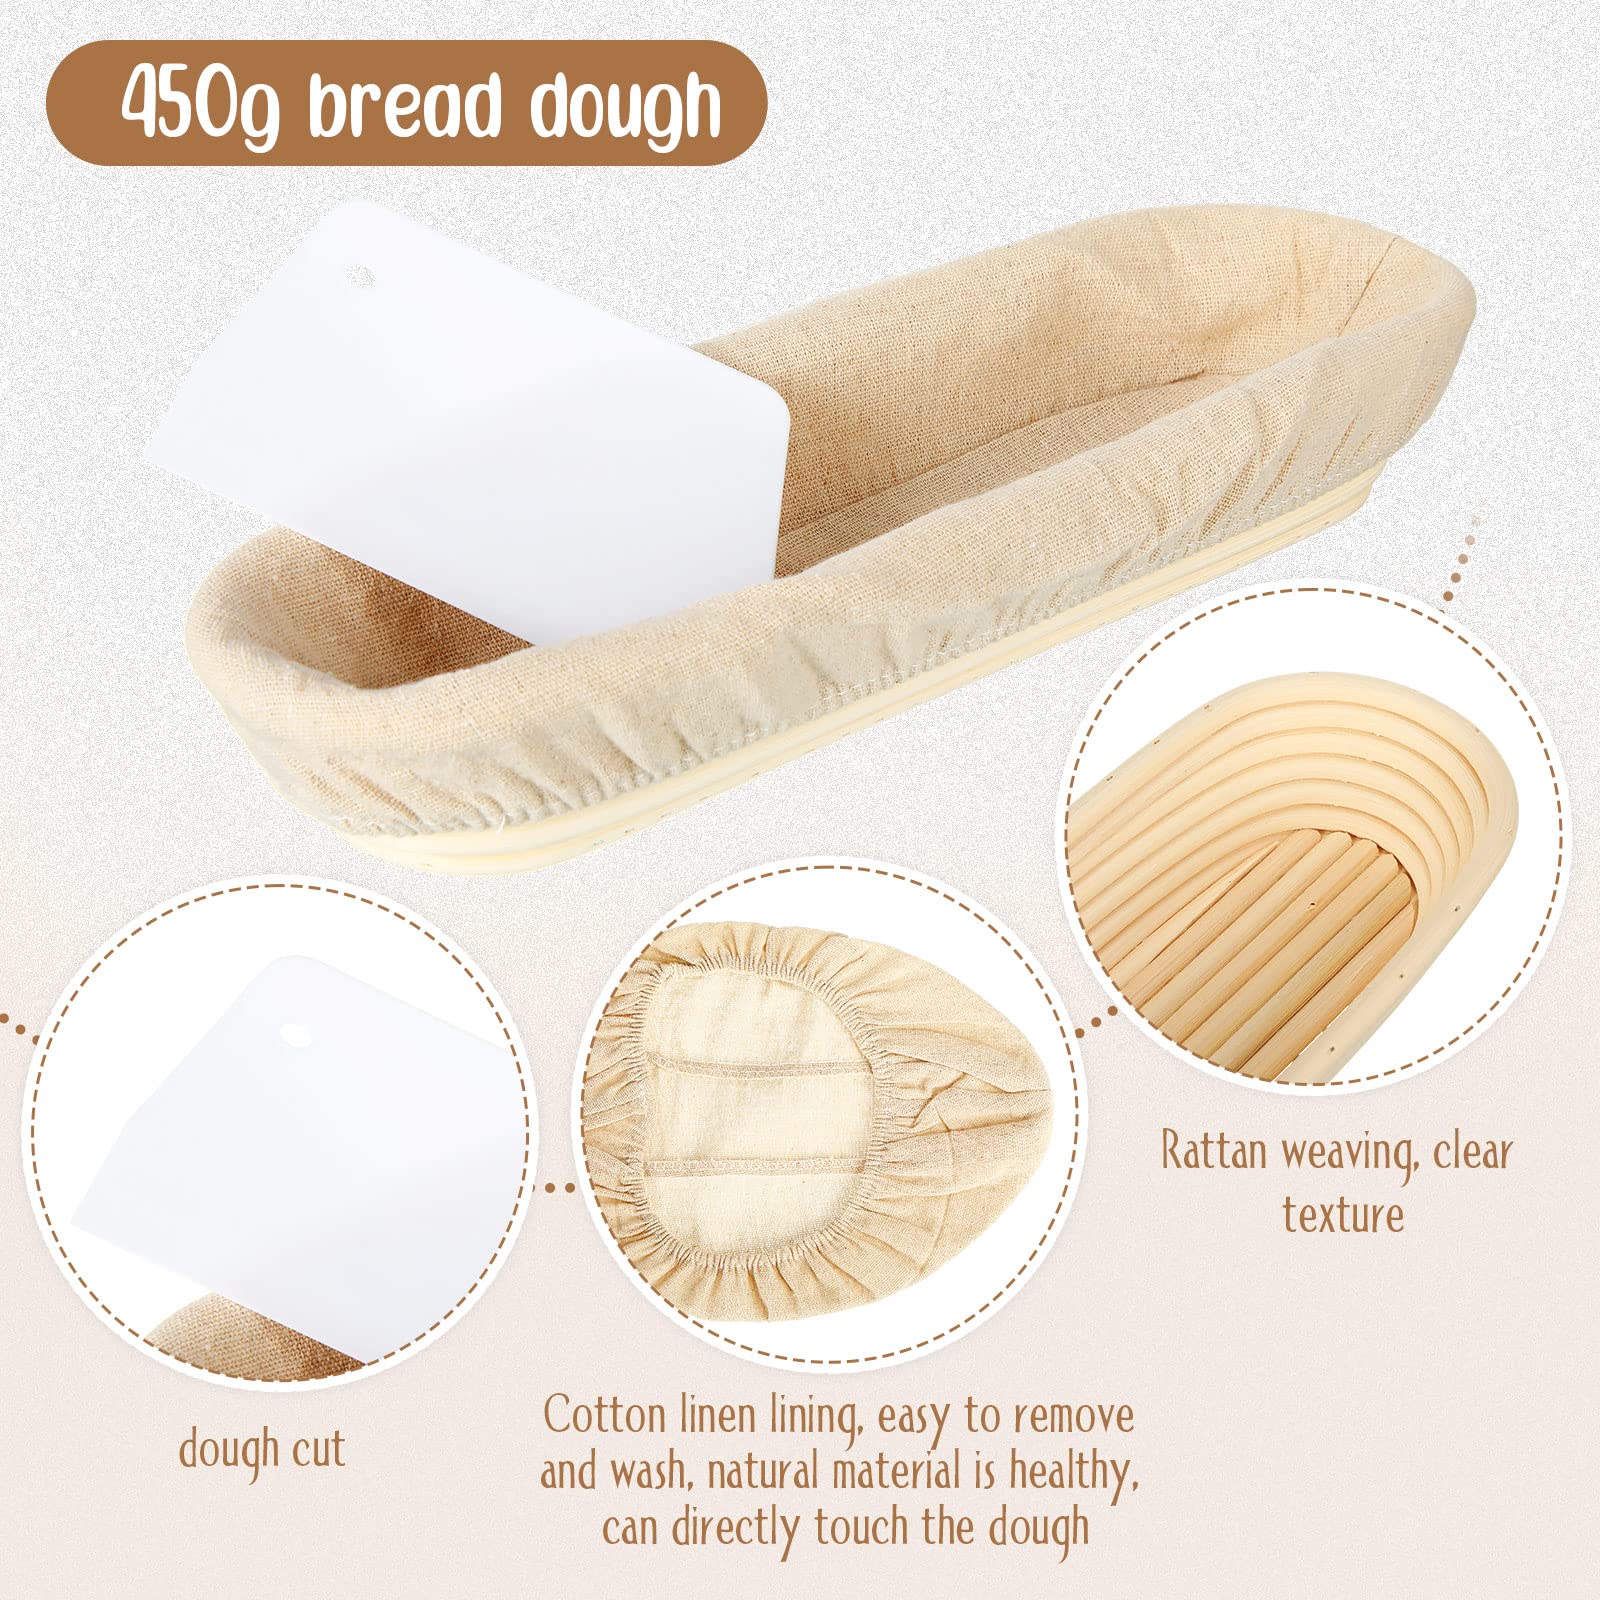 4 Pieces 13.8 Inch Banneton Bread Proofing Basket Oval Long Bread Proofing Basket Banneton Basket Dough Proofing Basket with Liners and Scatters for Home Sourdough Bread Baking